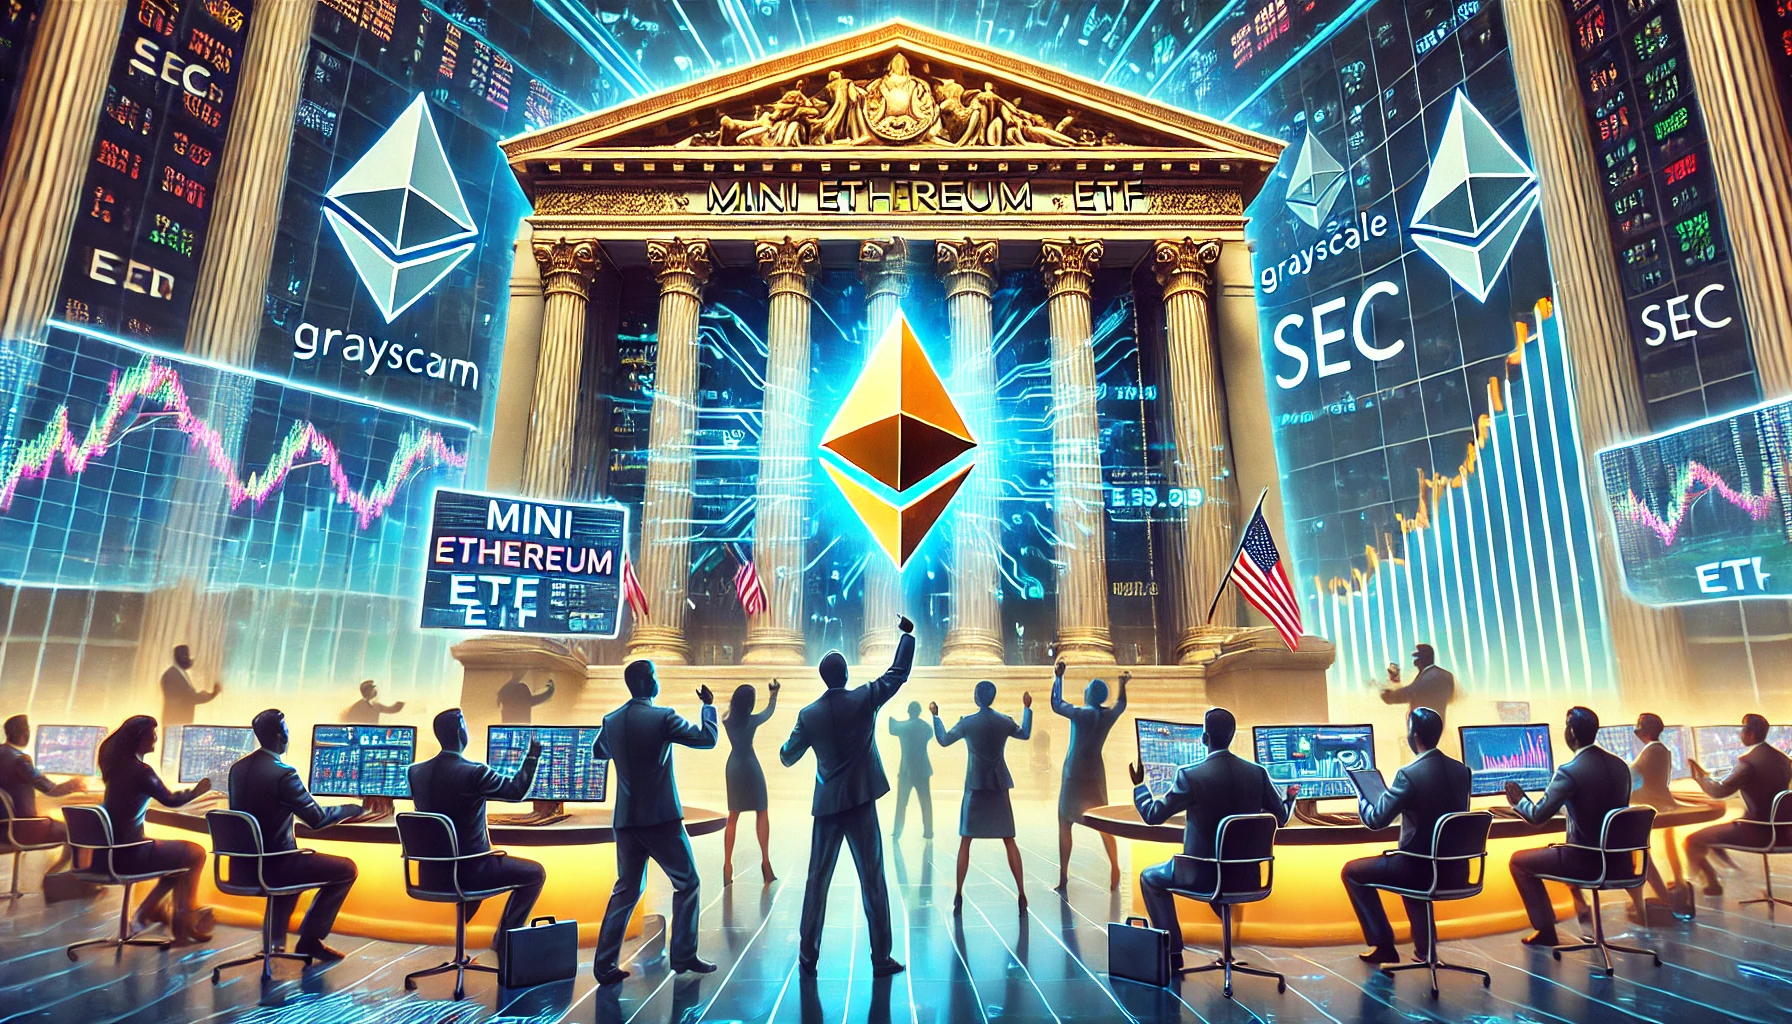 Ethereum Poised for Breakout? SEC ETF Approval (July 23rd) Could Be a Game Changer